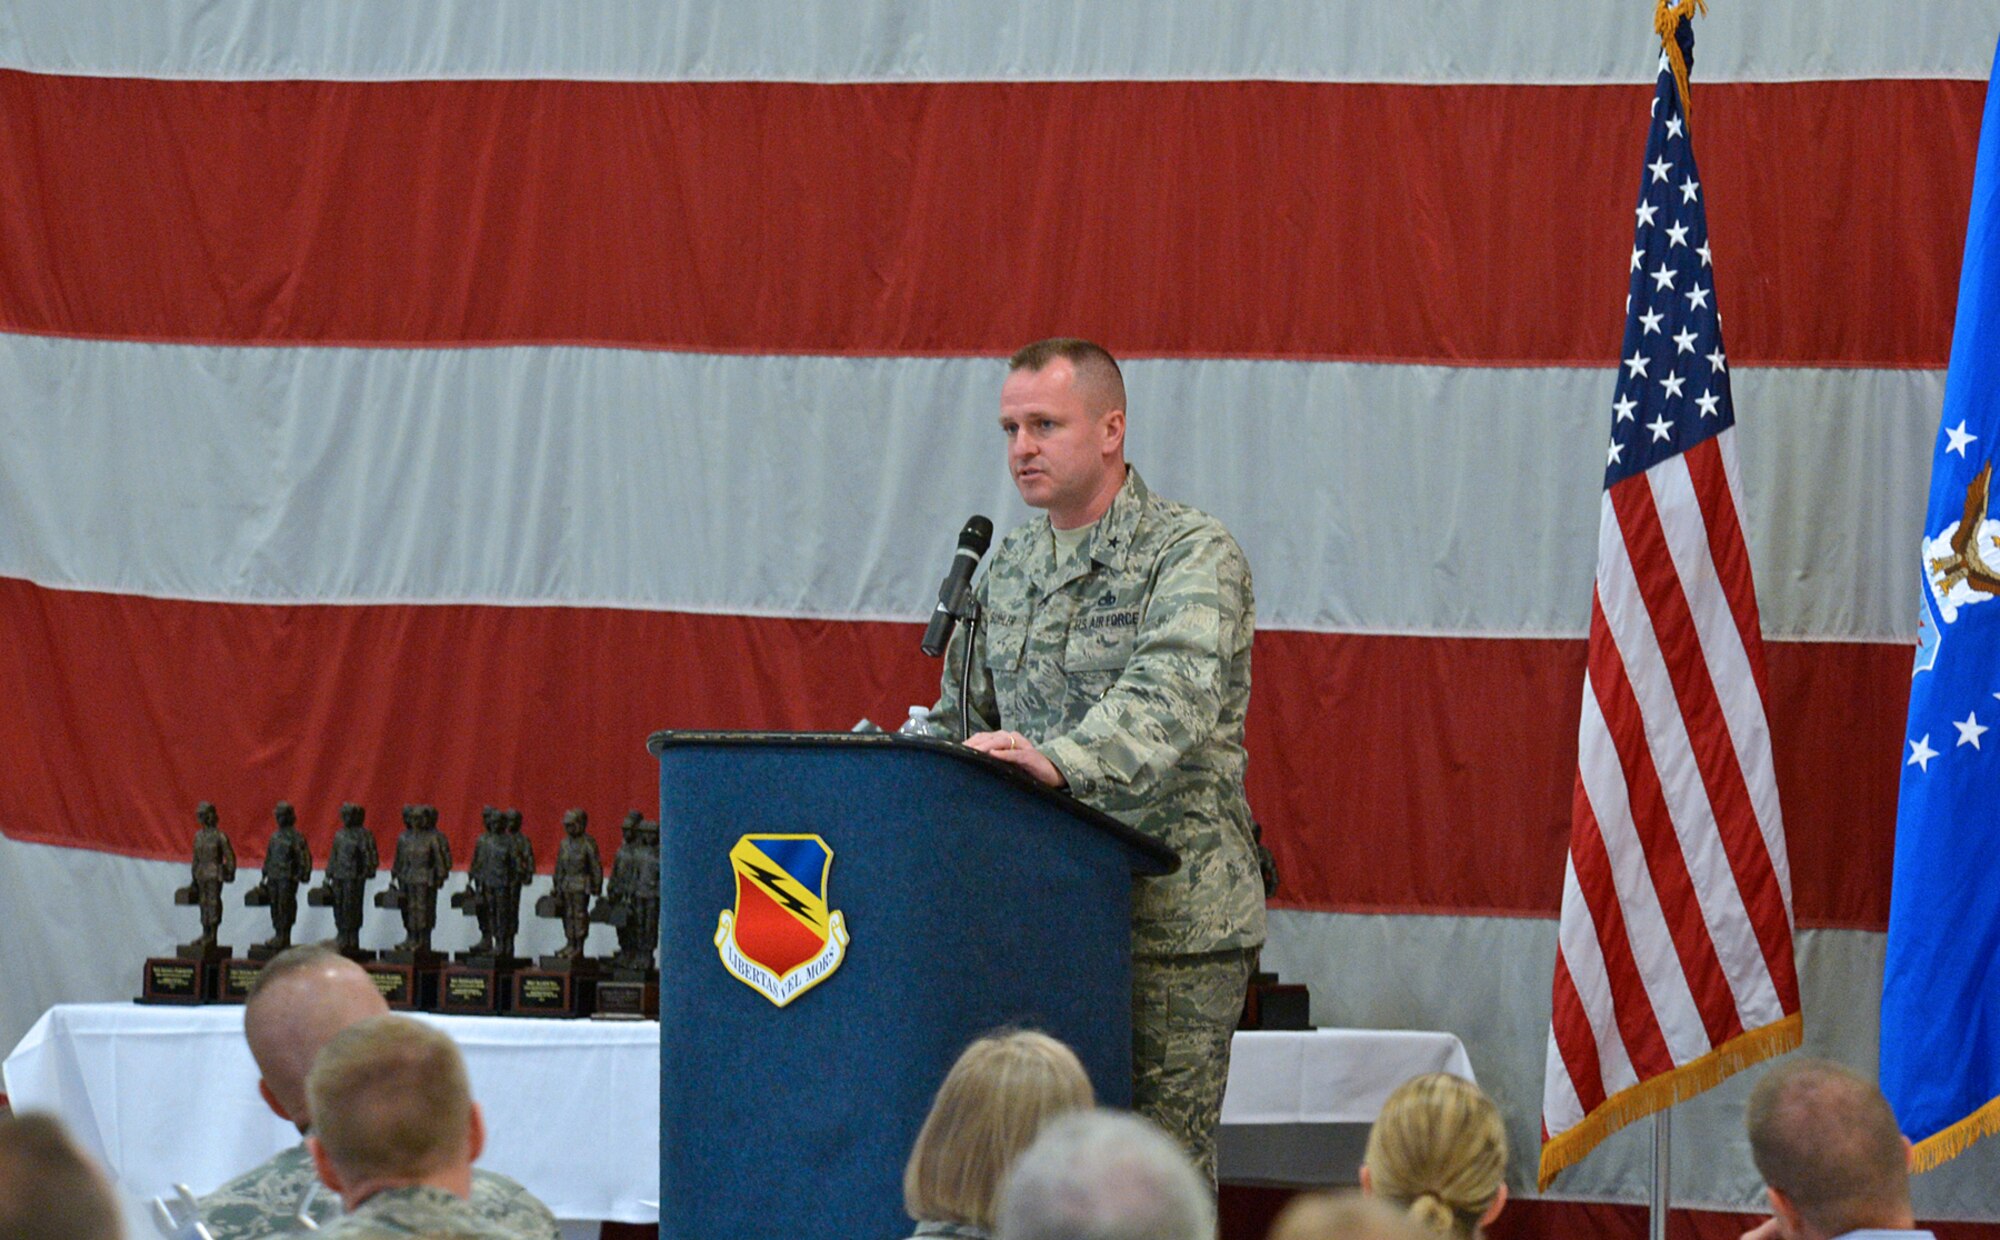 Ogden Air Logistics Complex Commander Brig. Gen. Carl Buhler speaks to Airmen at the 2014 Maintenance Professional of the Year award ceremony April 11, 2015. Buhler, who has performed a variety of munitions and maintenance missions over the course of his career, lauded the group for their efforts in 2014. (U.S. Air Force photo by Alex R. Lloyd)